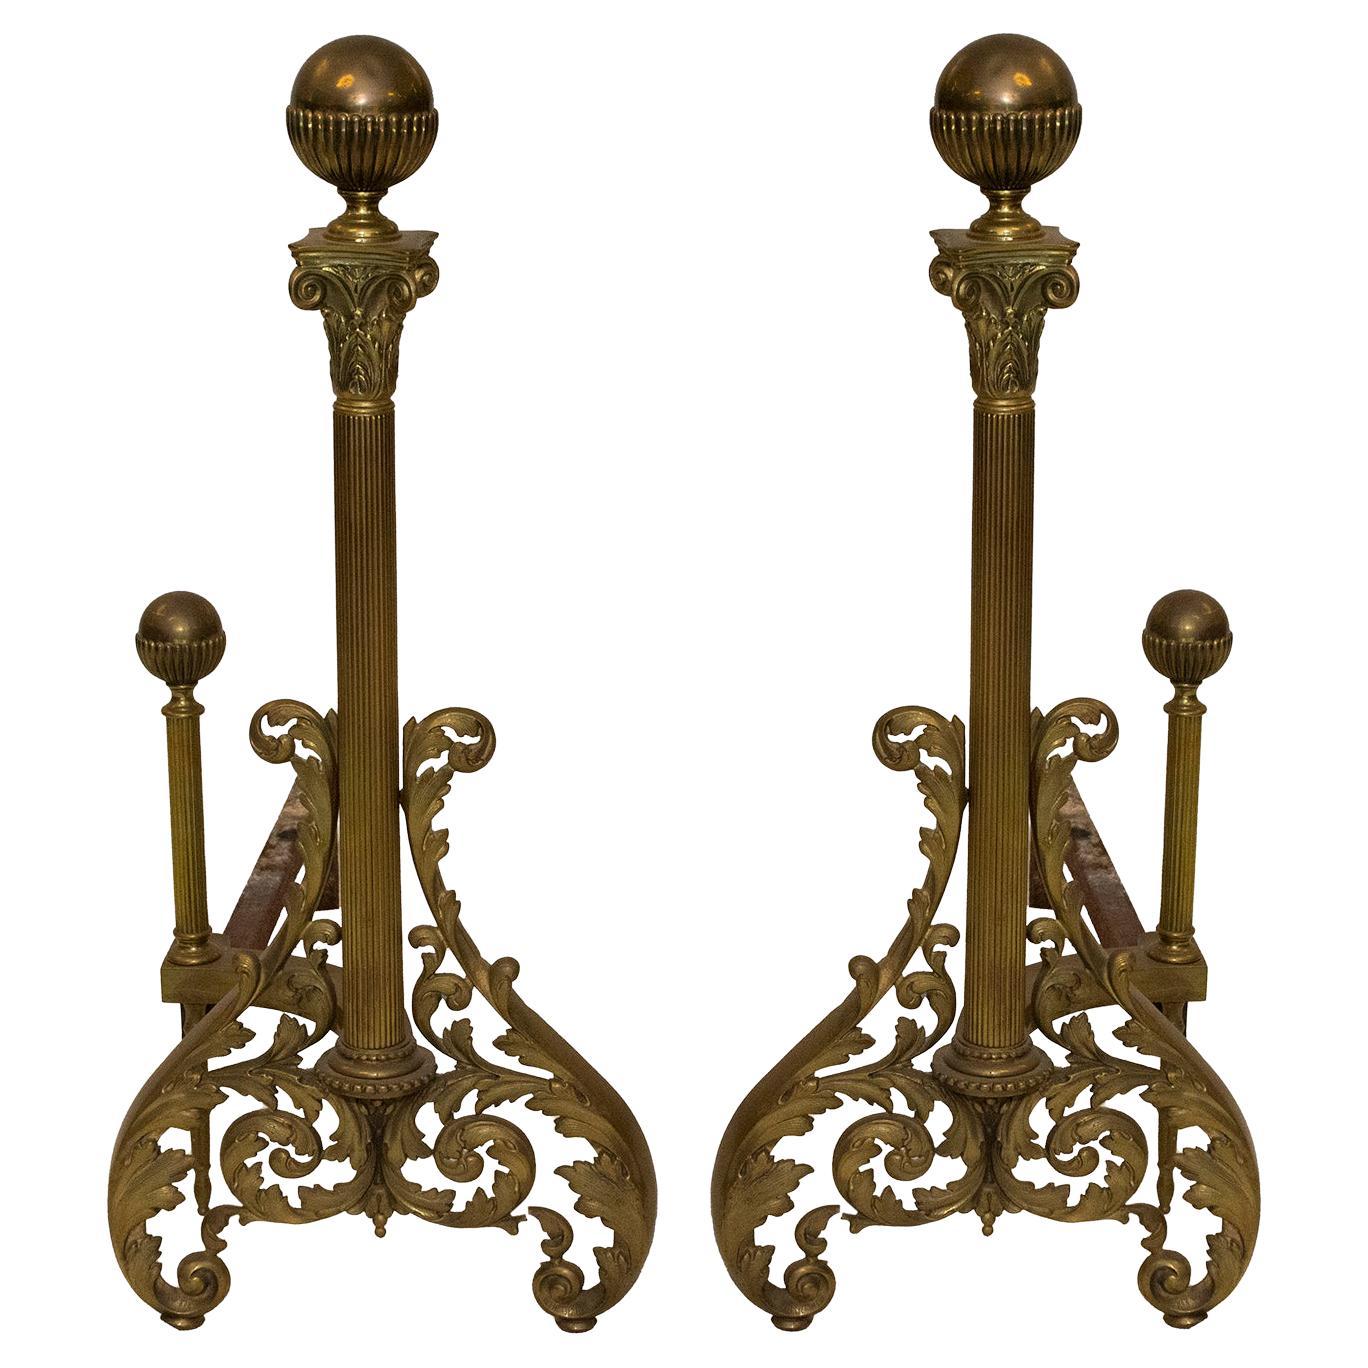 Decorative Vintage Neoclassical-Inspired Brass and Iron Andirons